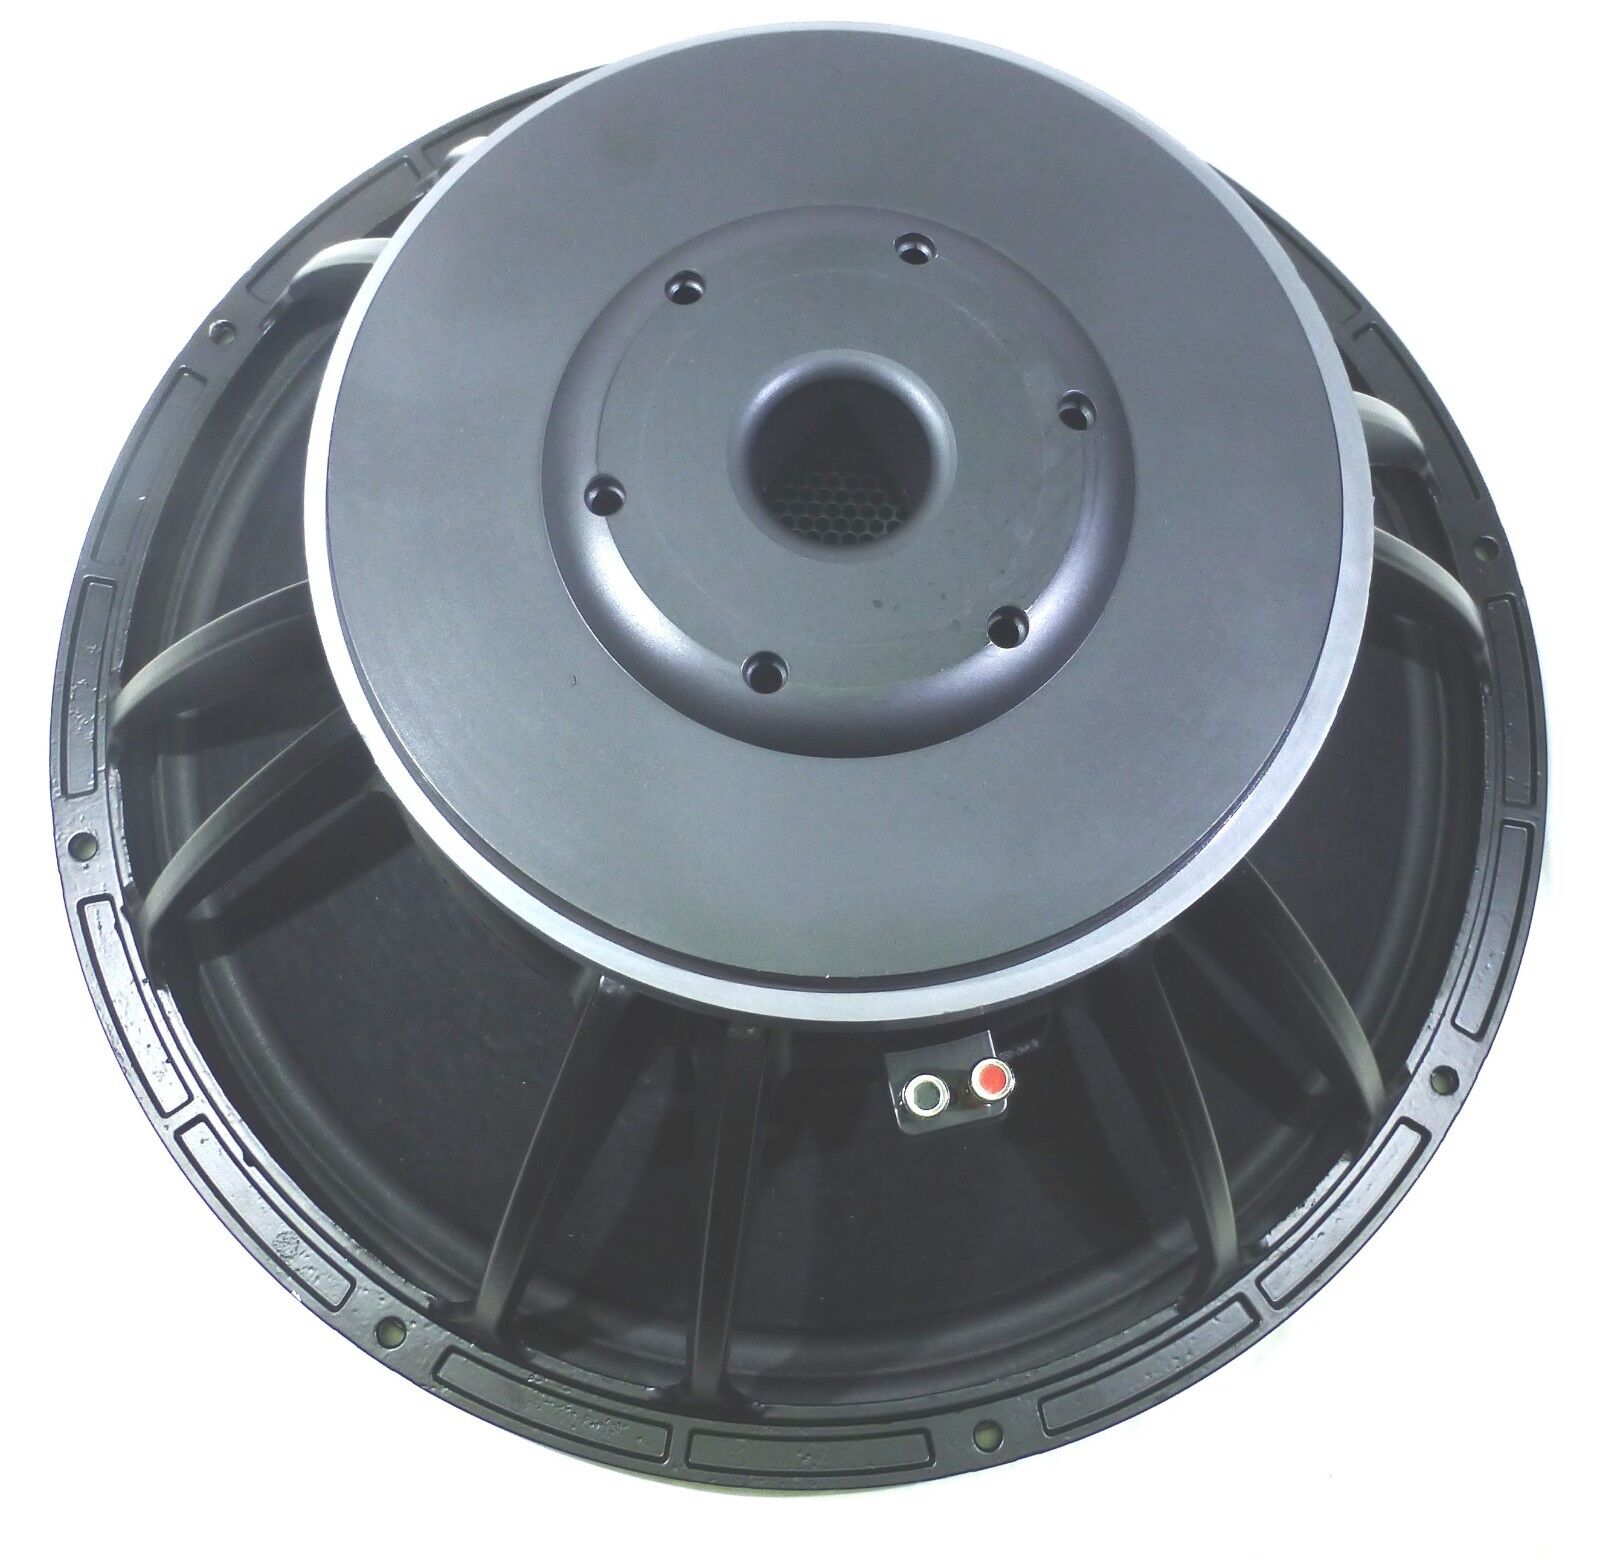 LASE 21LW-3600 21" Low Frequency 8 Ohm Woofer